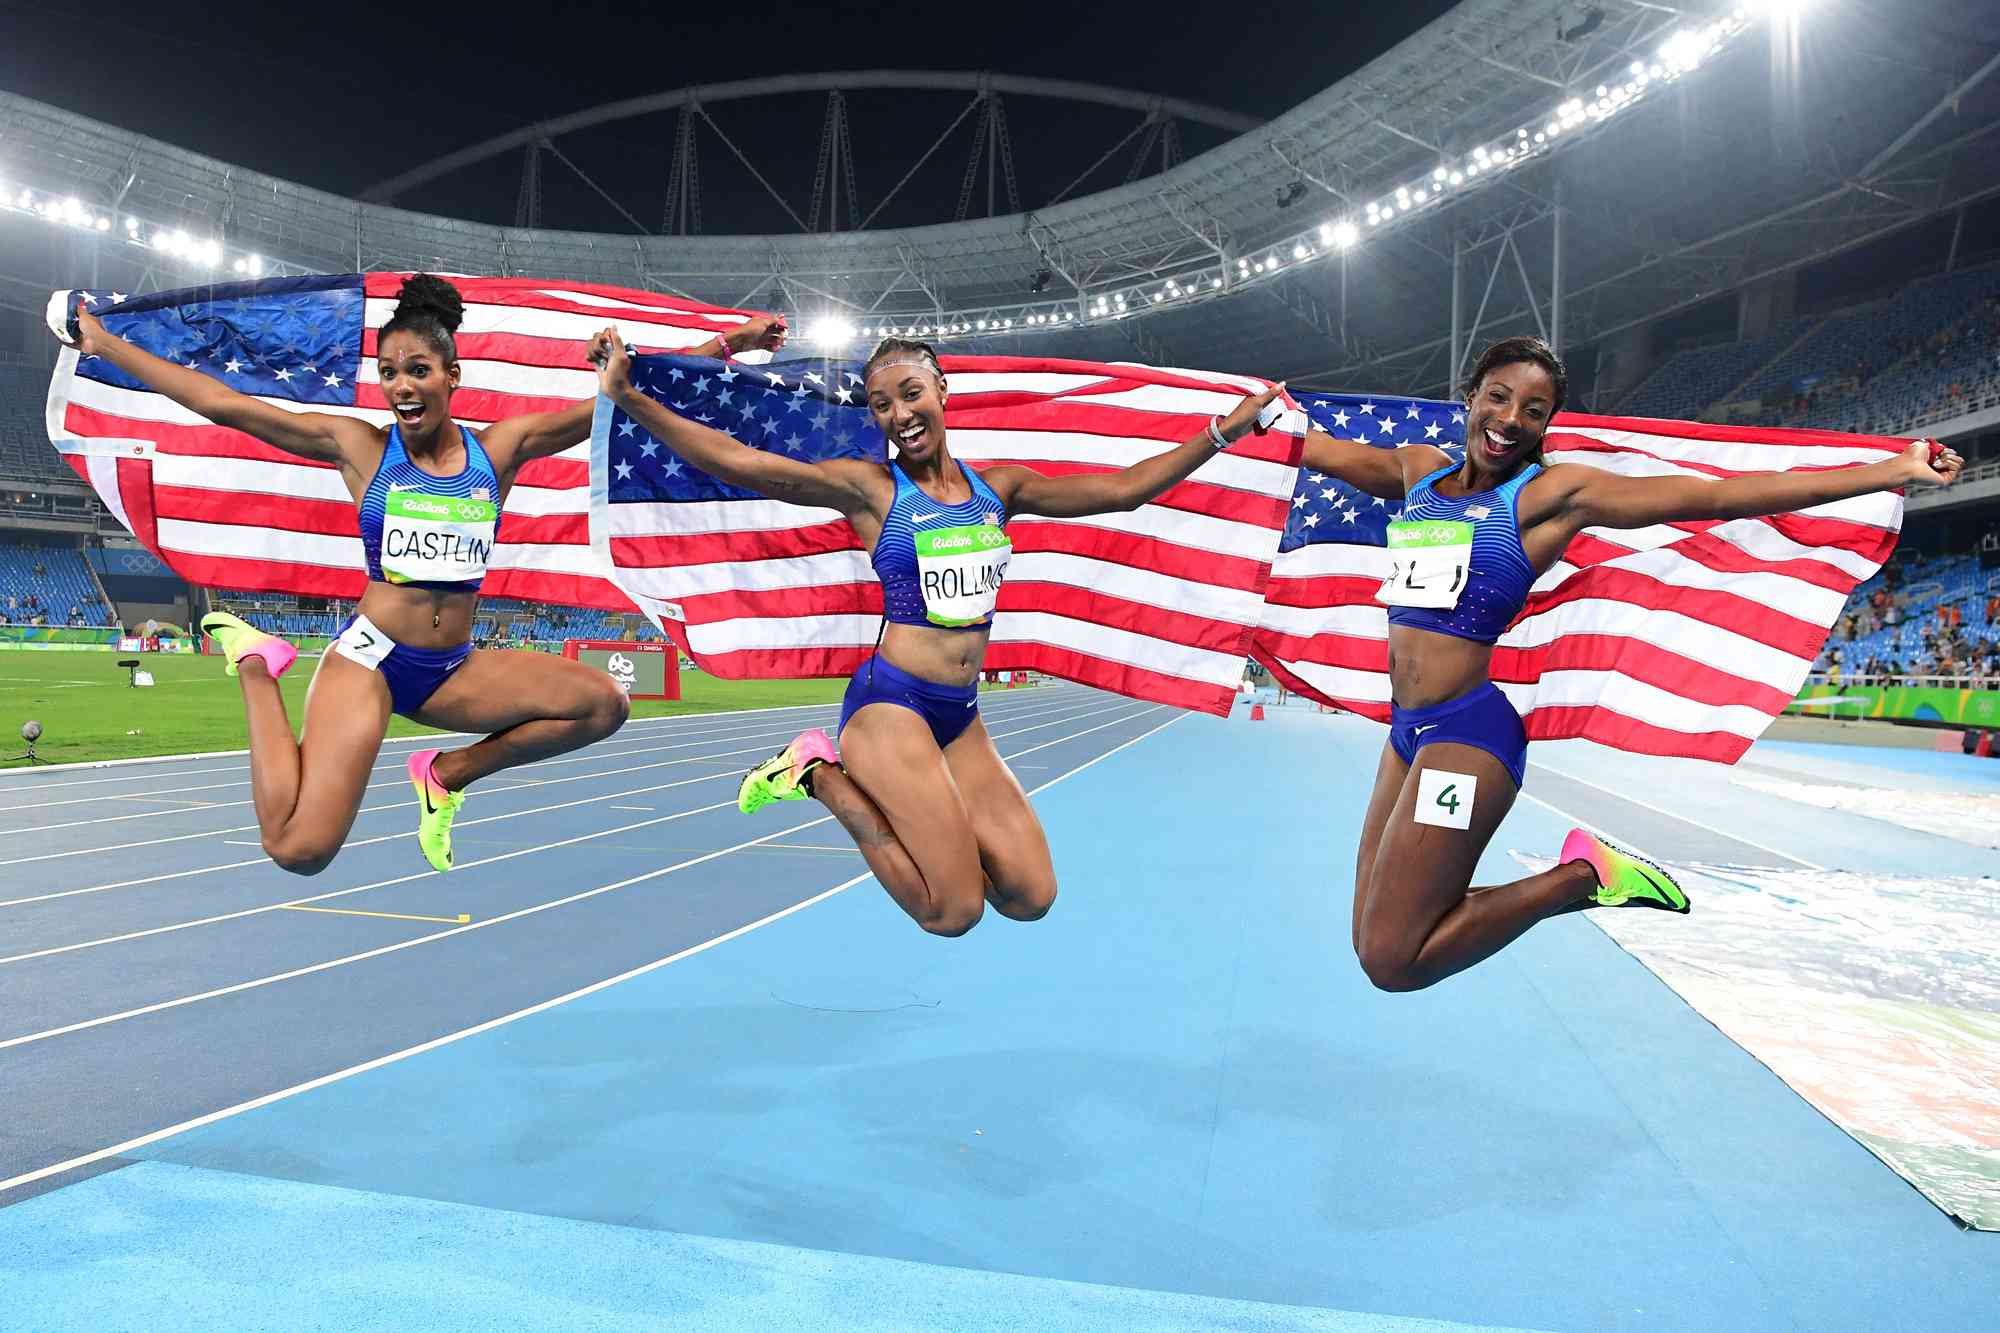 Bronze medallist USA's Kristi Castlin, gold medallist USA's Brianna Rollins and silver medallist USA's Nia Ali celebrate after the Women's 100m Hurdles Final during the athletics event at the Rio 2016 Olympic Games at the Olympic Stadium in Rio de Janeiro on August 17, 2016. 